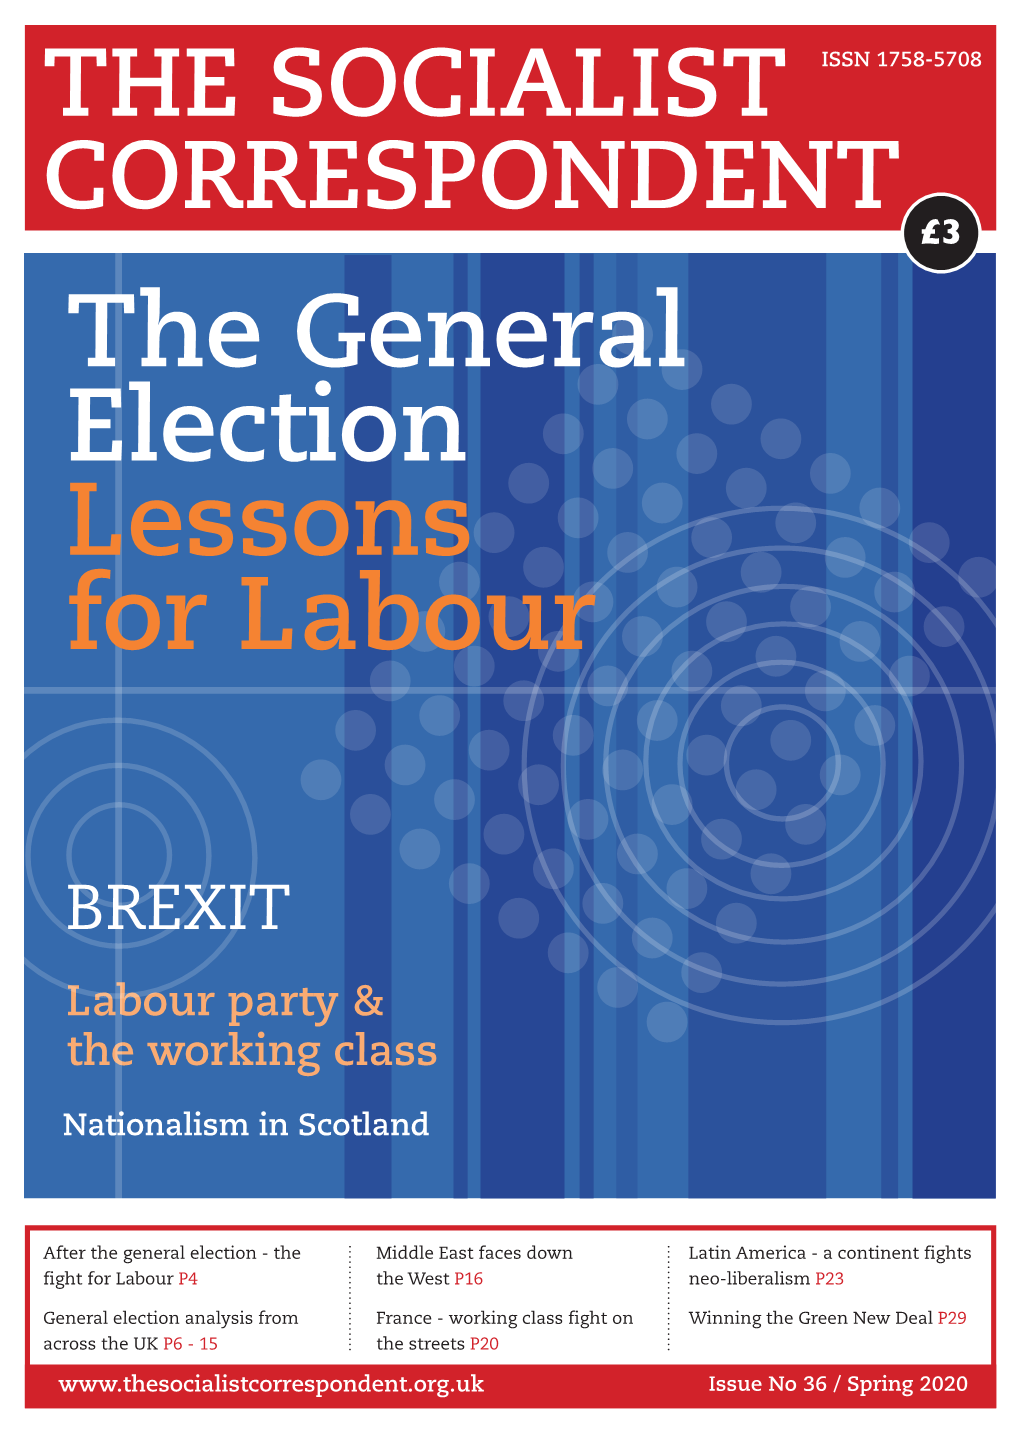 The General Election Lessons for Labour